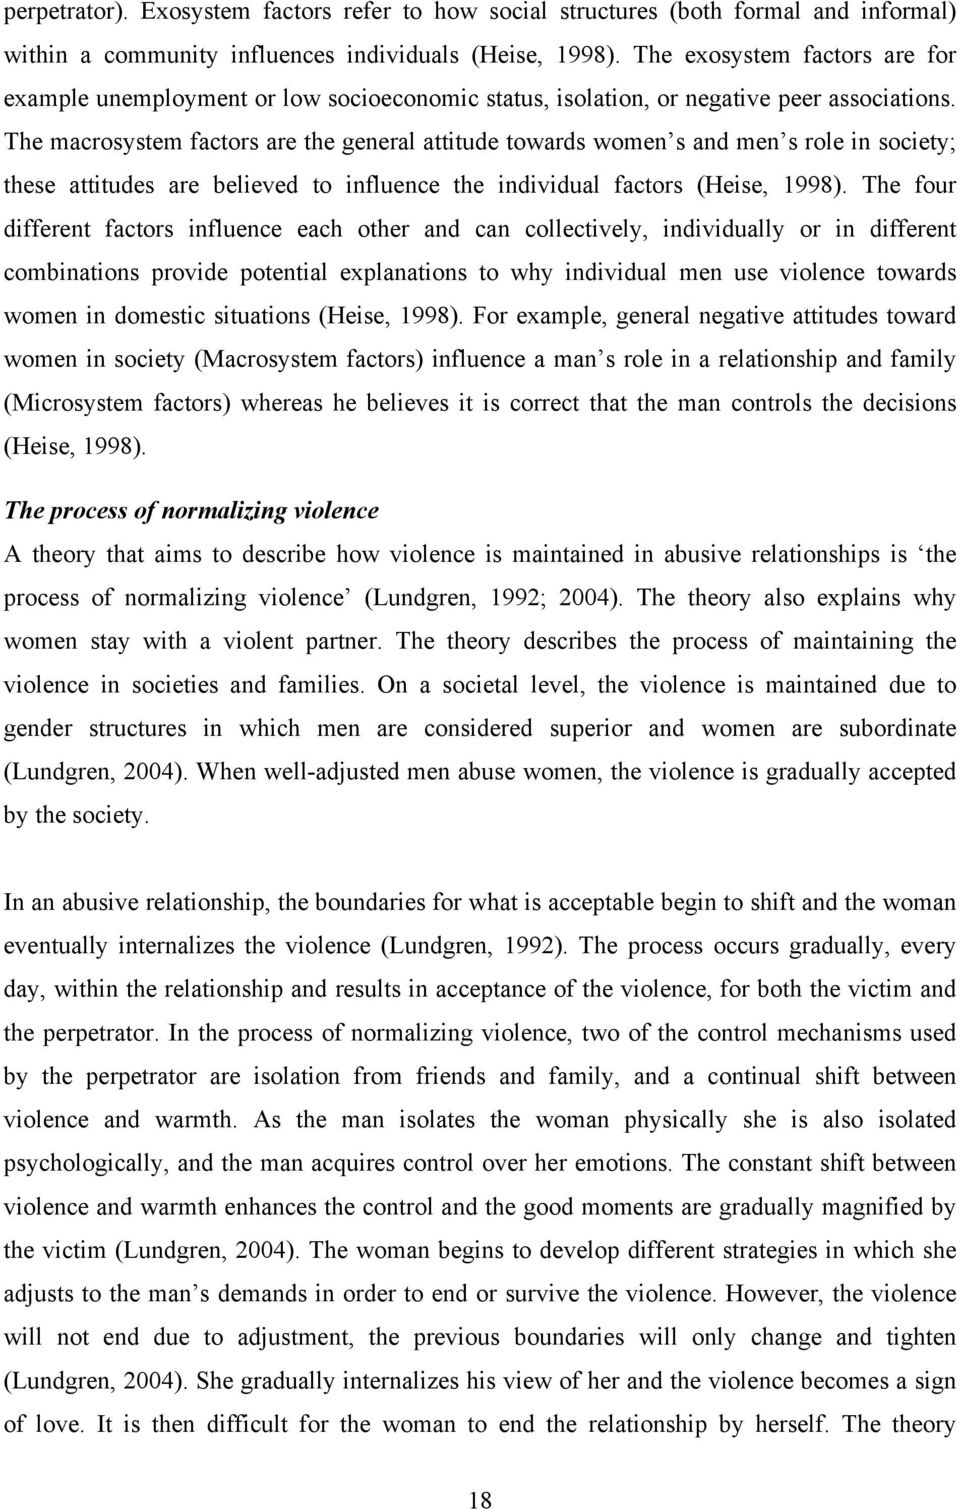 The macrosystem factors are the general attitude towards women s and men s role in society; these attitudes are believed to influence the individual factors (Heise, 1998).